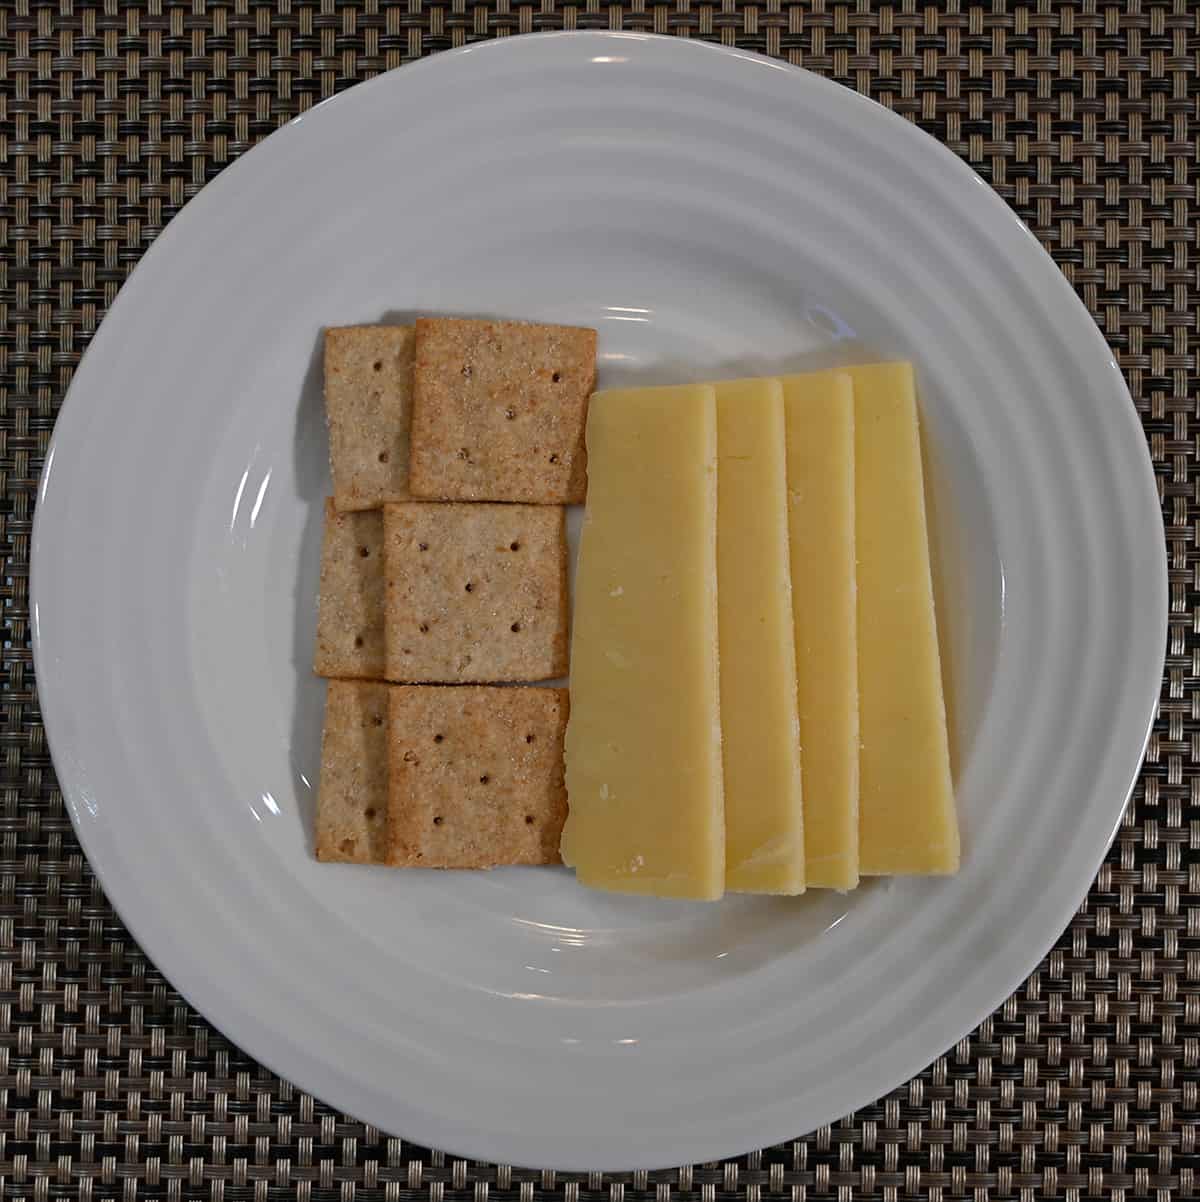 Top down image of the Dubliner cheese sliced and served with crackers on a white plate.